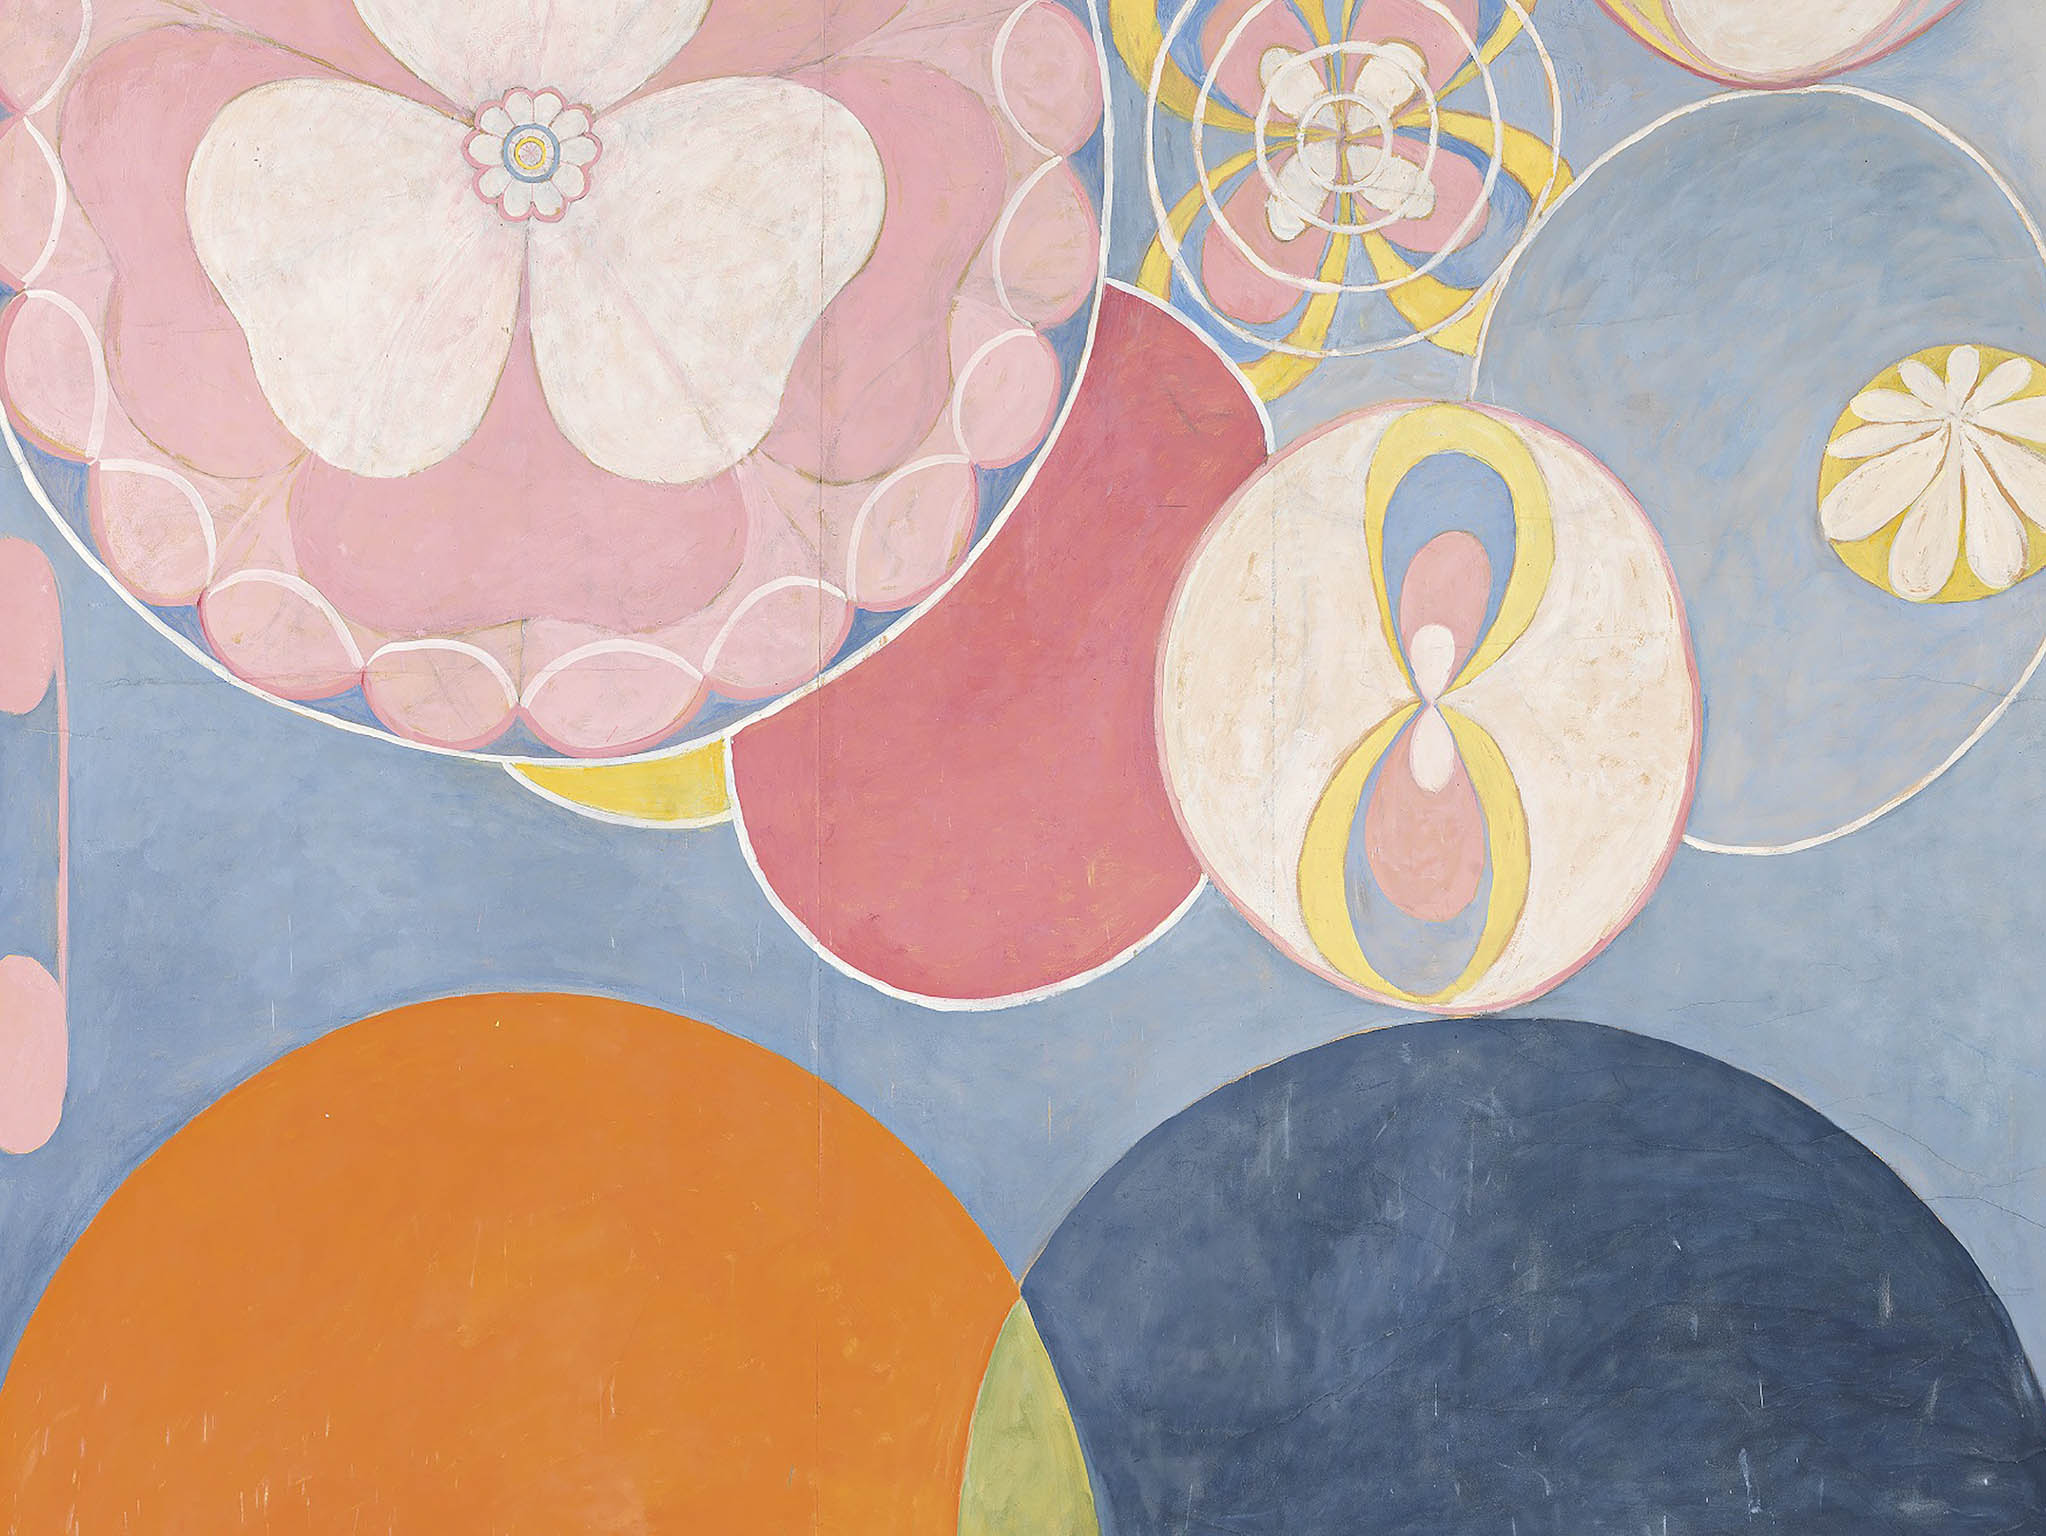 Af Klint’s absence from the art historical canon will bring her the distinction of being the earliest-born artist honoured with a show at London’s Serpentine Gallery